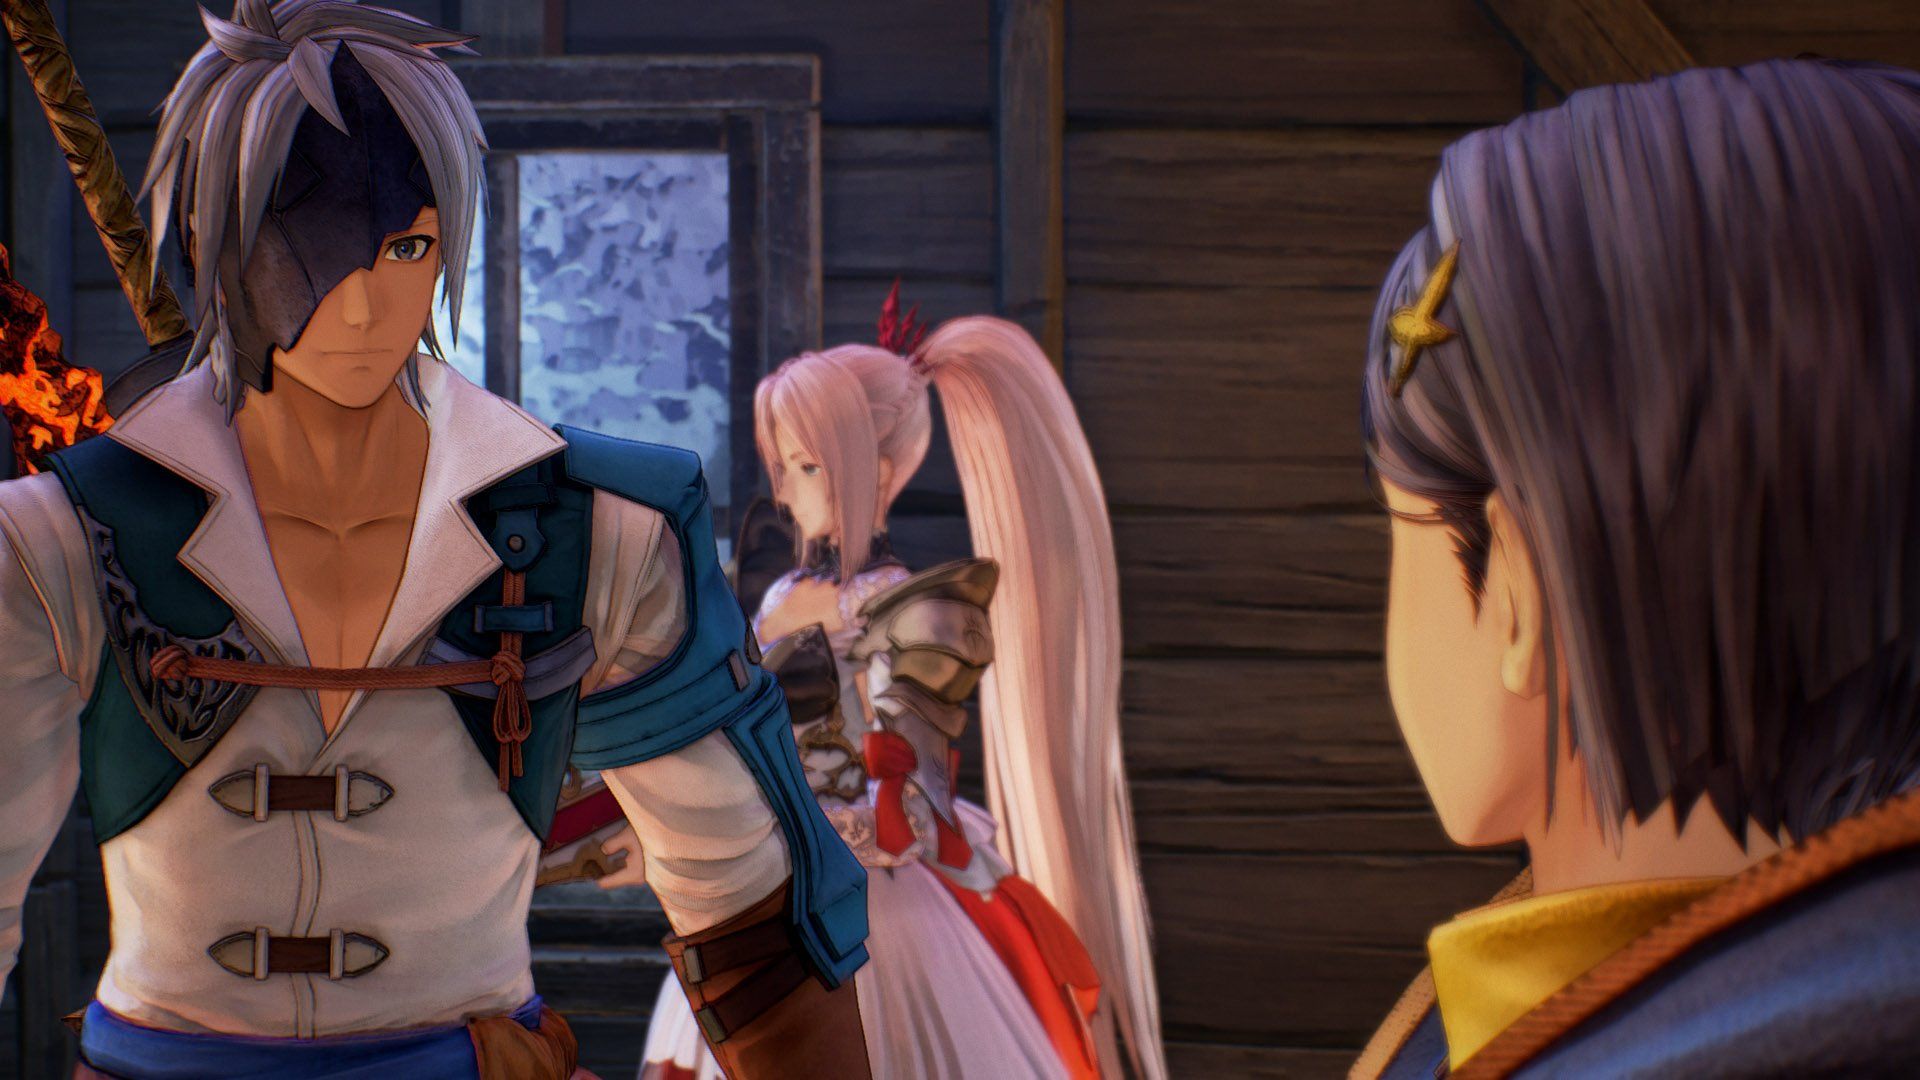 How to upgrade Tales of Arise PS5 tales of arise how to upgrade to ps5 guide feature official screenshot rinwell shionne alphen